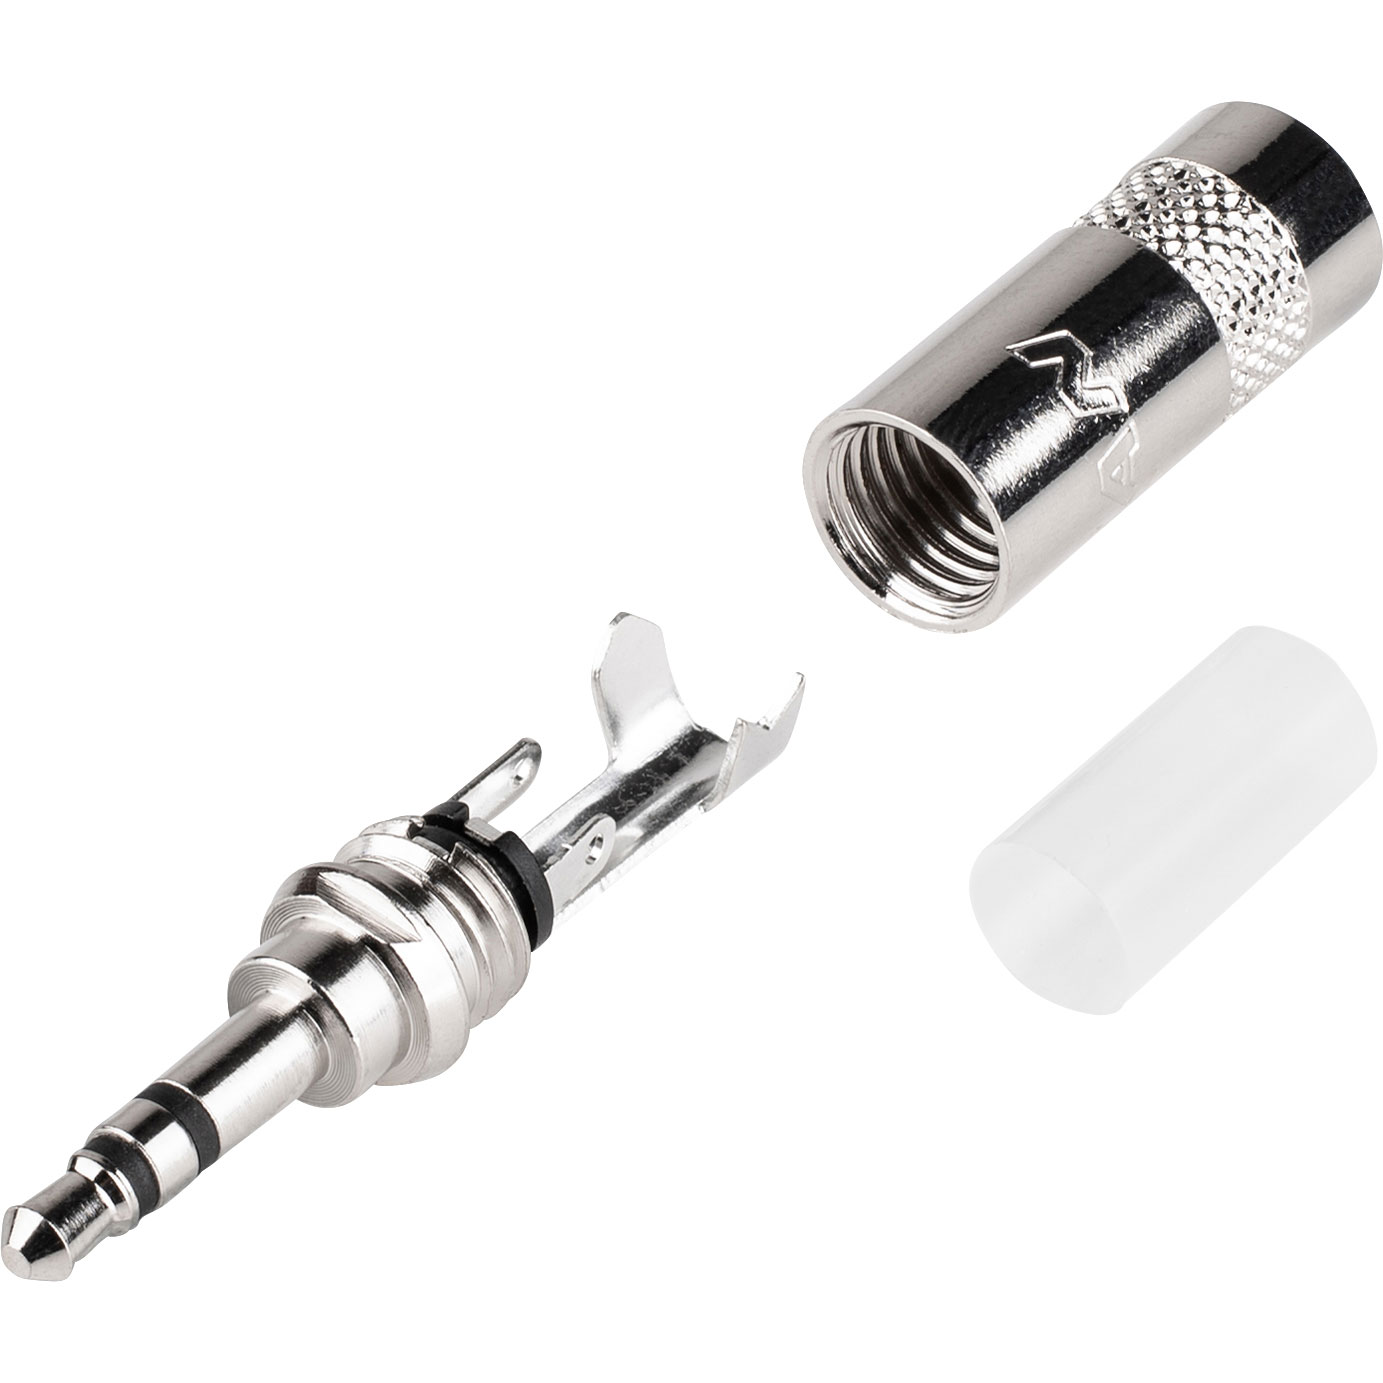 NETURIK REAN 3.5MM NICKEL STEREO PLUG WITH CONTACT